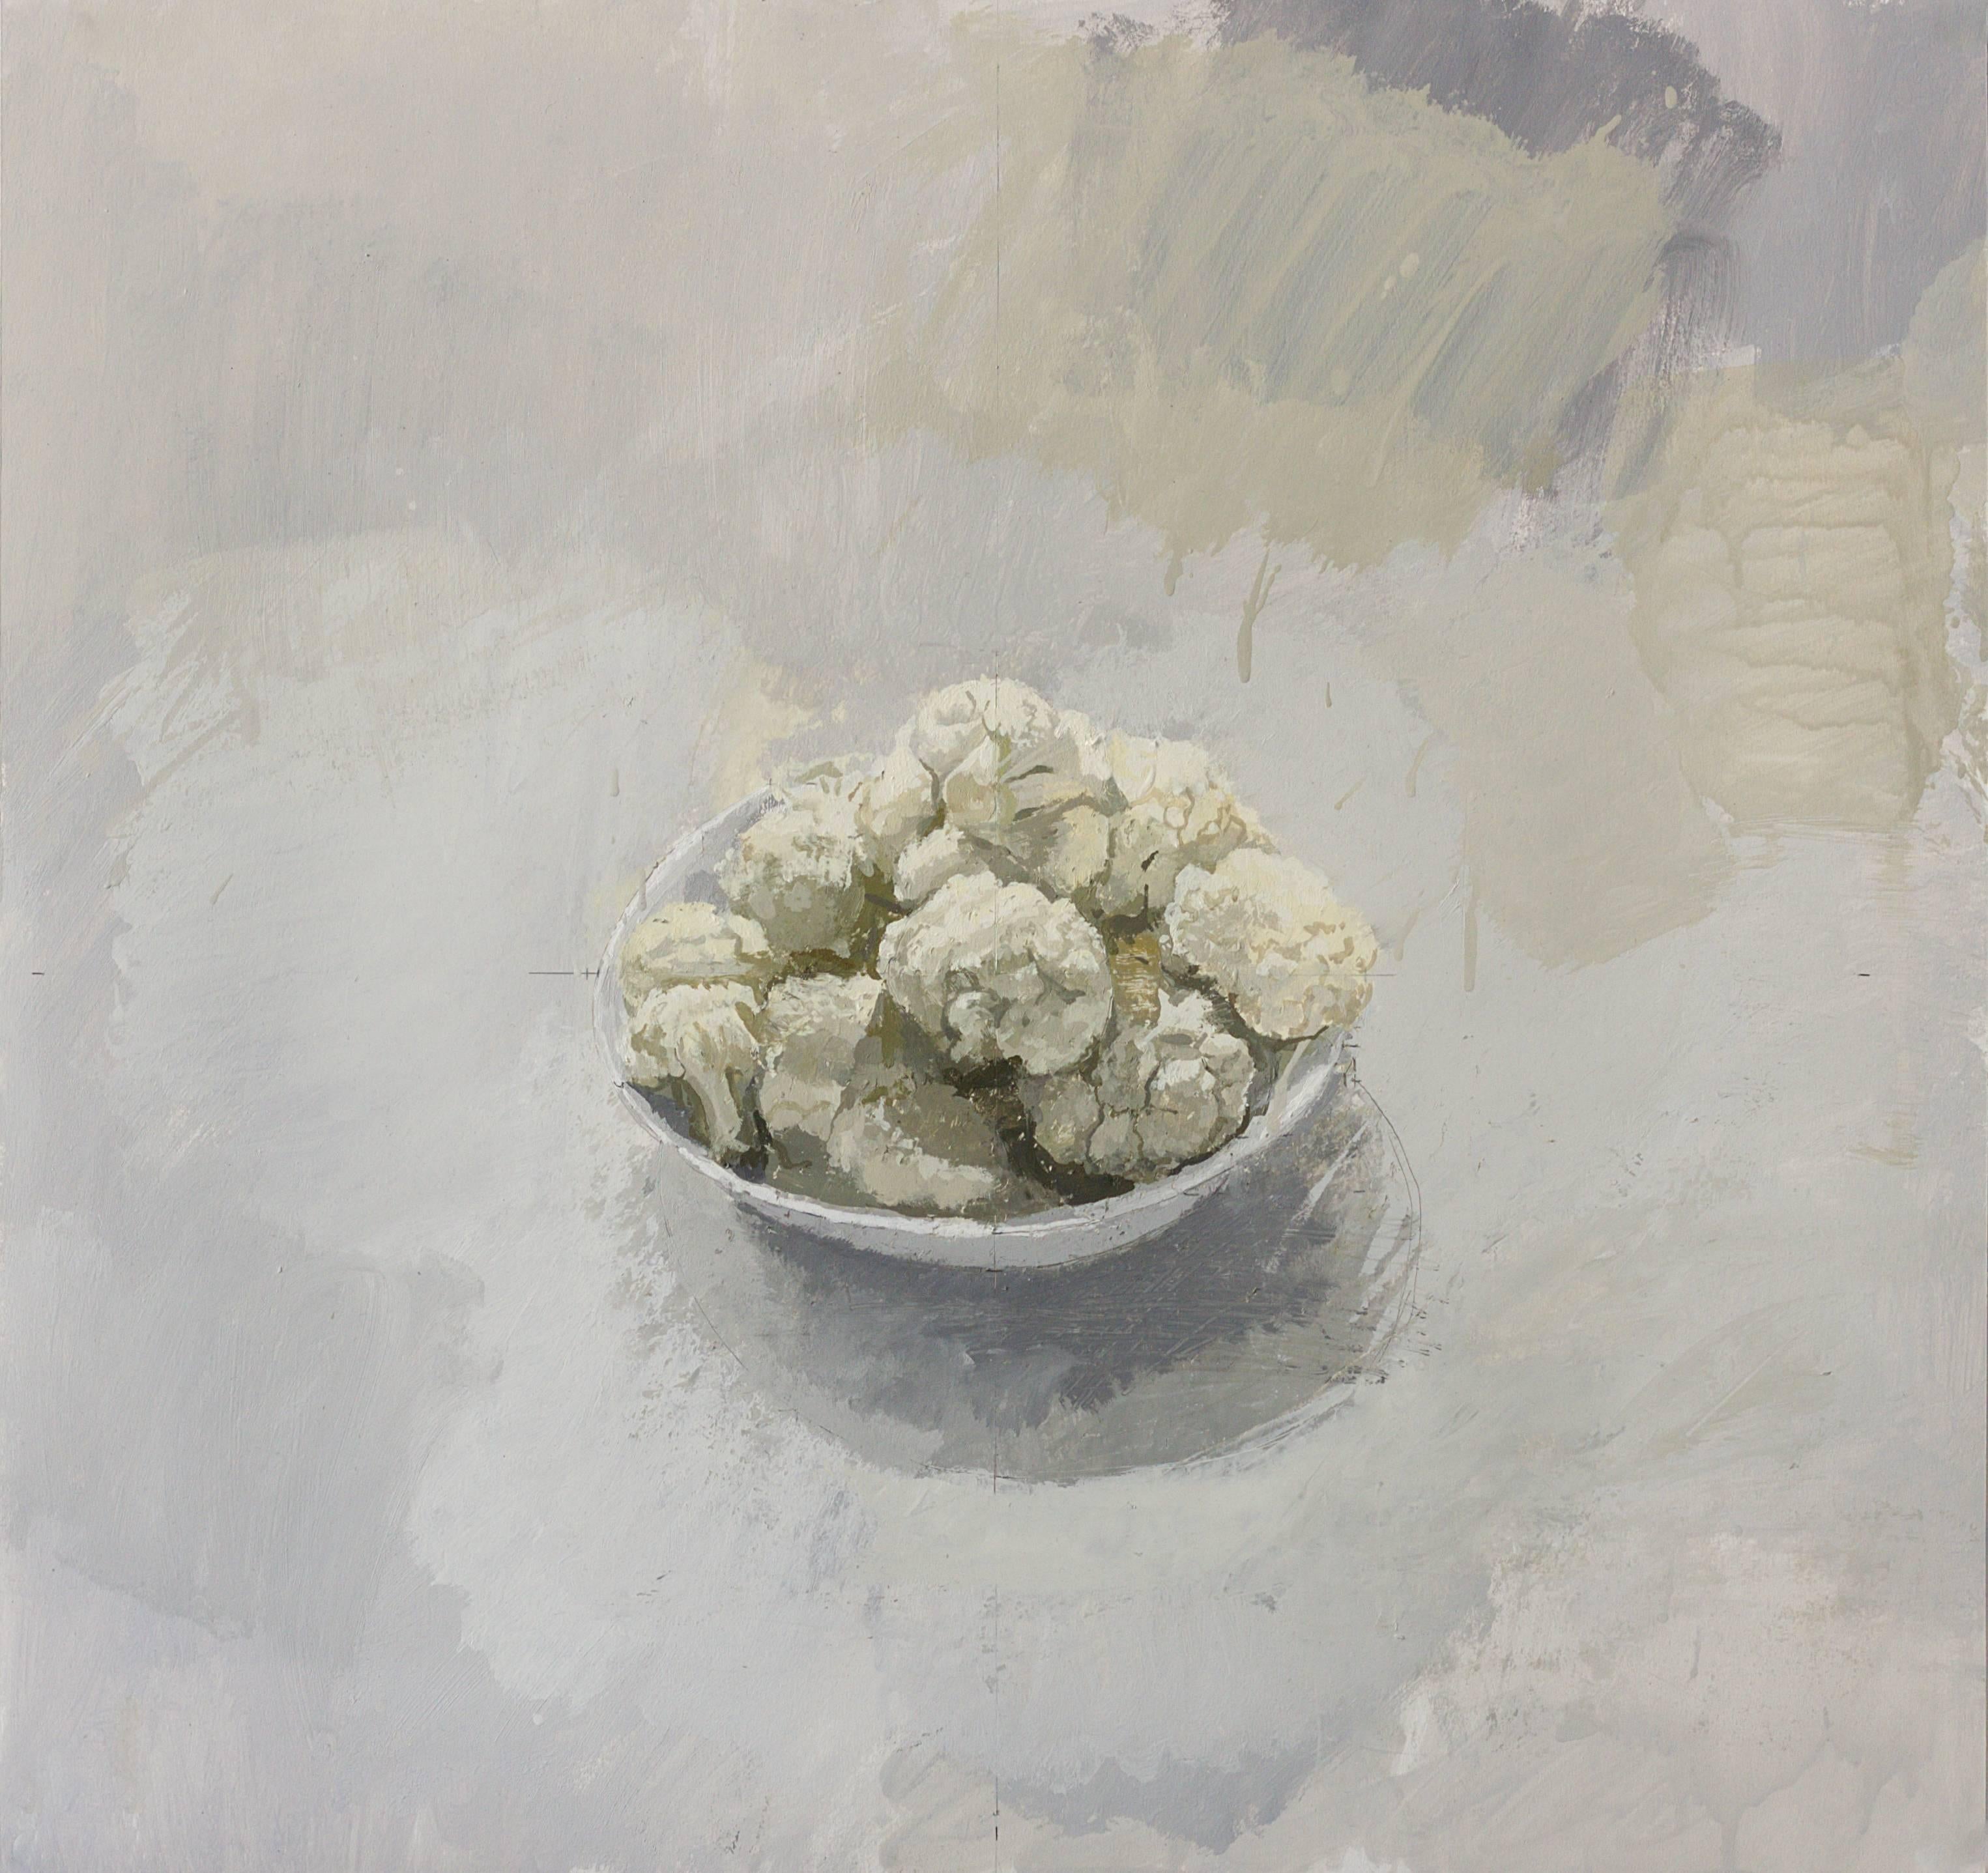 A still life on paper from Alberto Romero.   A cauliflower in a bowl. Very delicate painted on paper and framed.
The work is shipped in a floating frame size ~ 70 x 70 cm, but can also be shipped without frame. 

The work of Alberto Romero consists